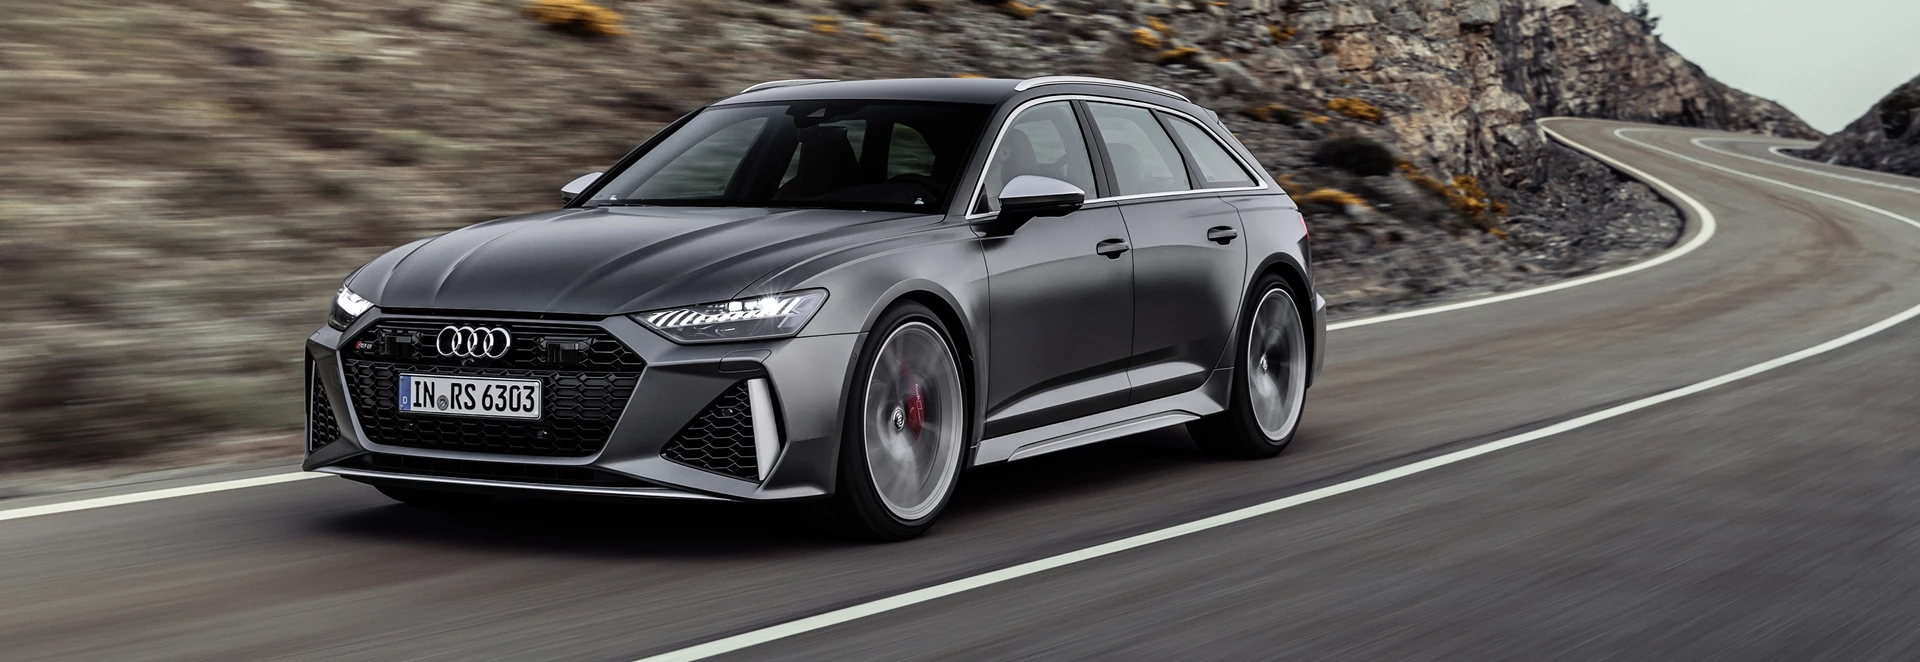 What’s coming from Audi in 2020?